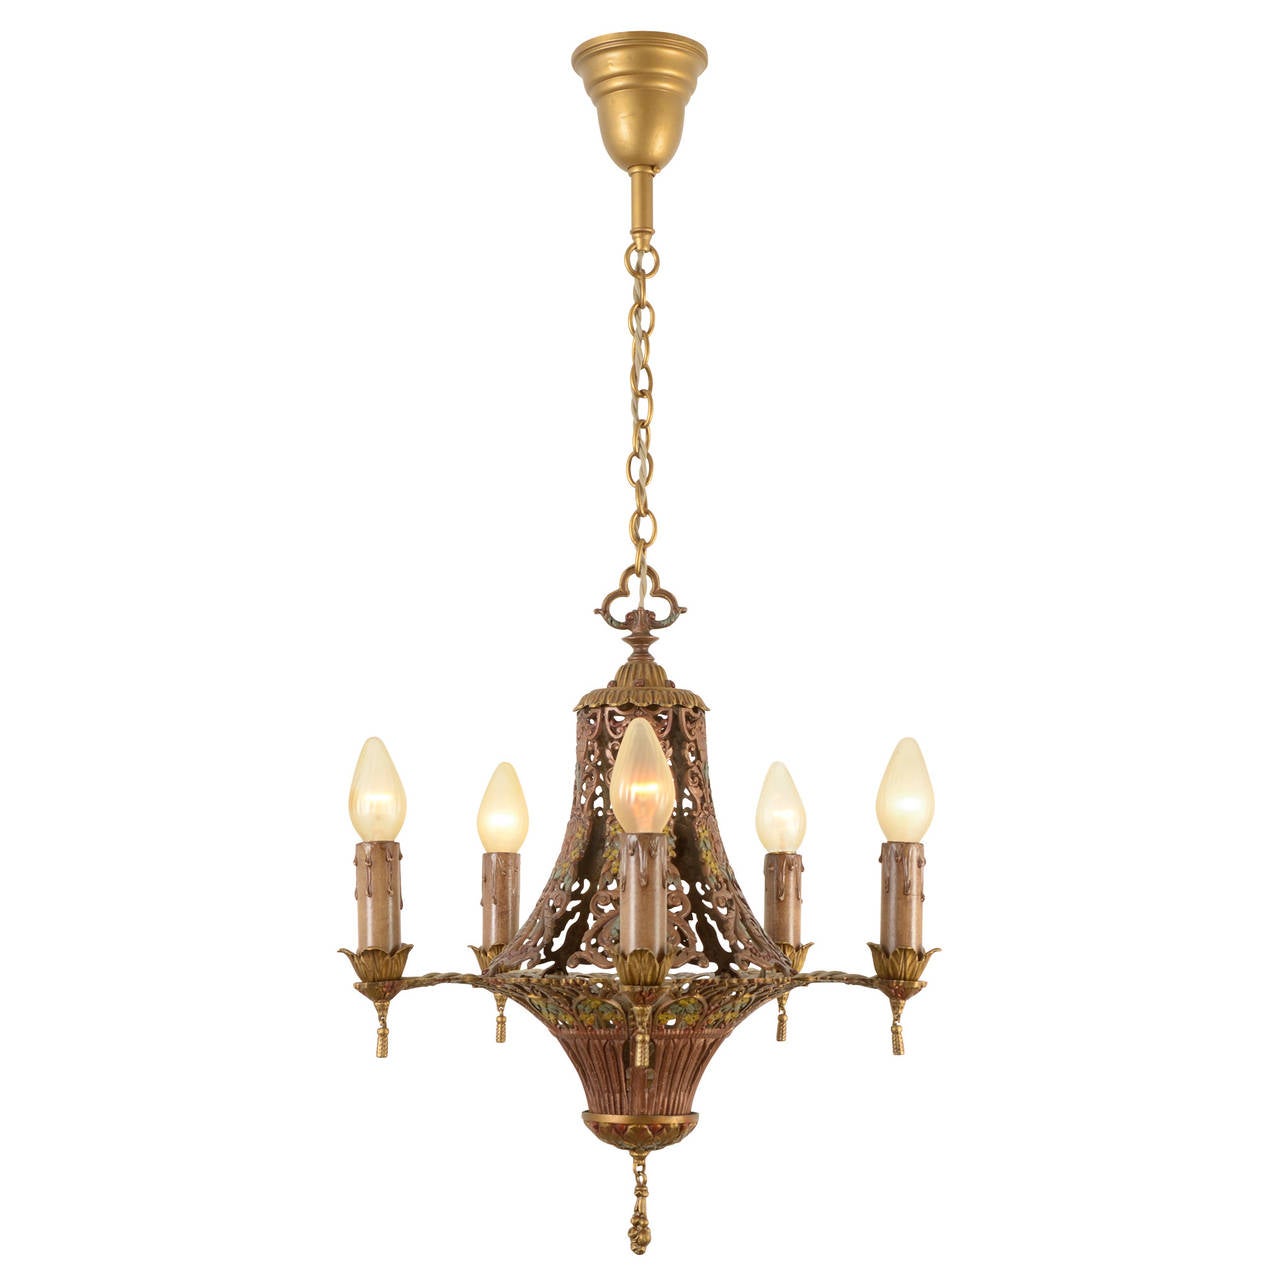 The late-1920s saw an explosion in the popularity of decorative cast white-metal fixtures with exposed globe bulbs and rich polychrome finishes like this example. Most were either flush mounts or chain-hung chandeliers, so an elegant, compact